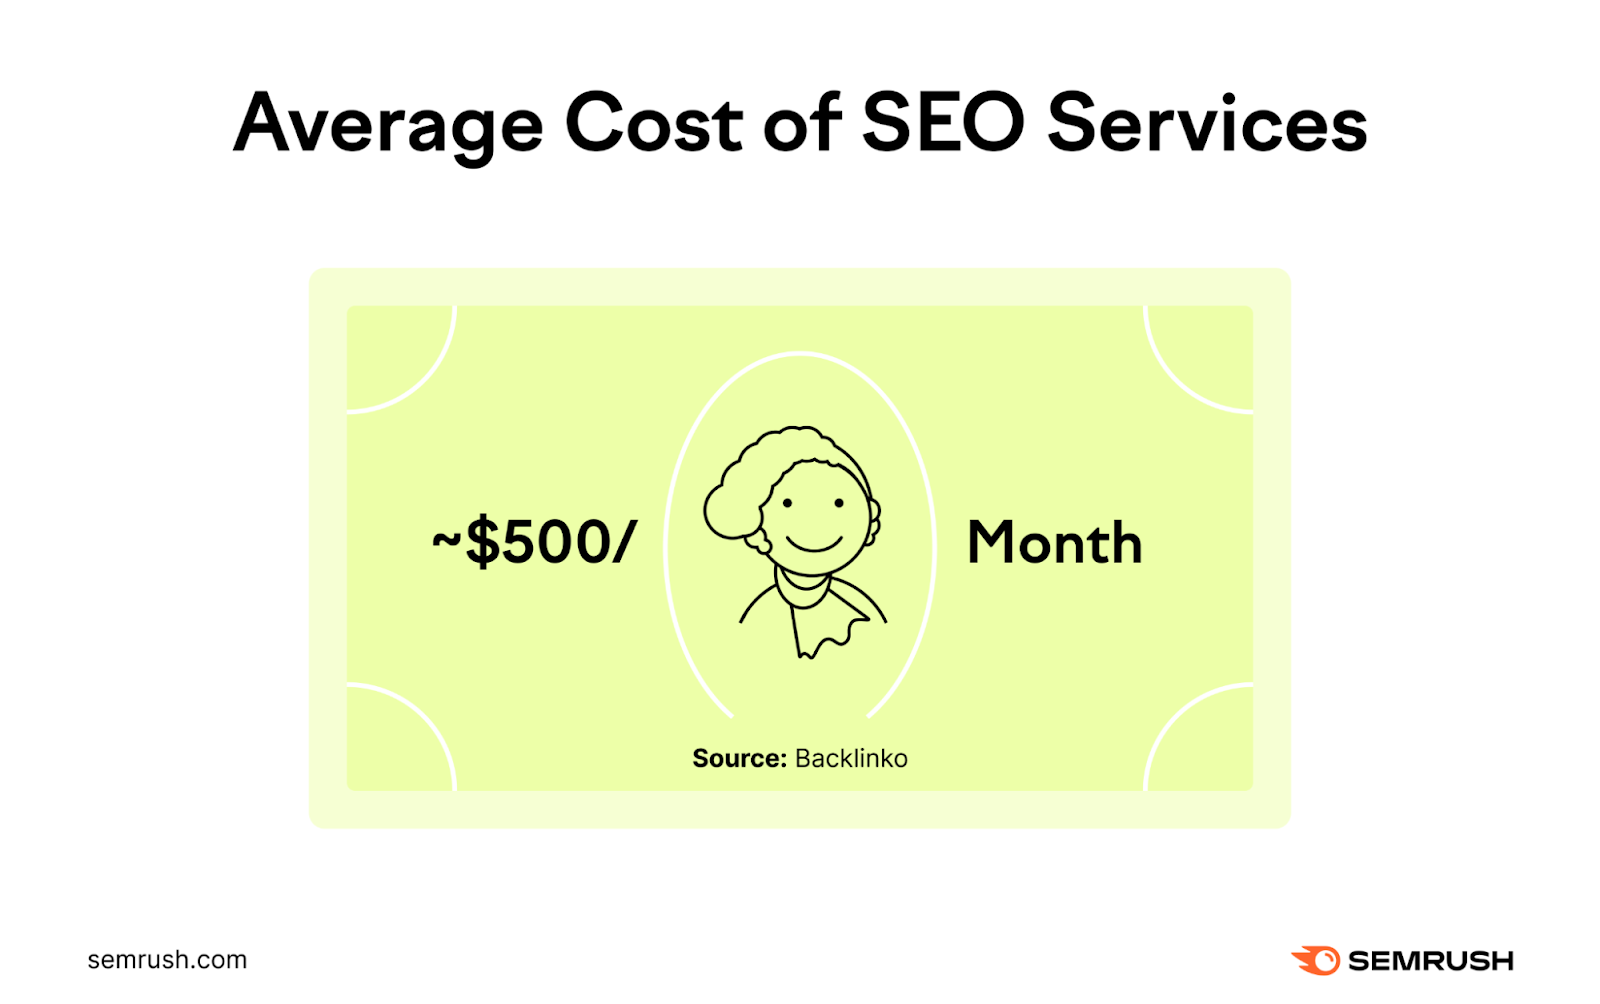 Average cost of SEO services, according to Backlinko study